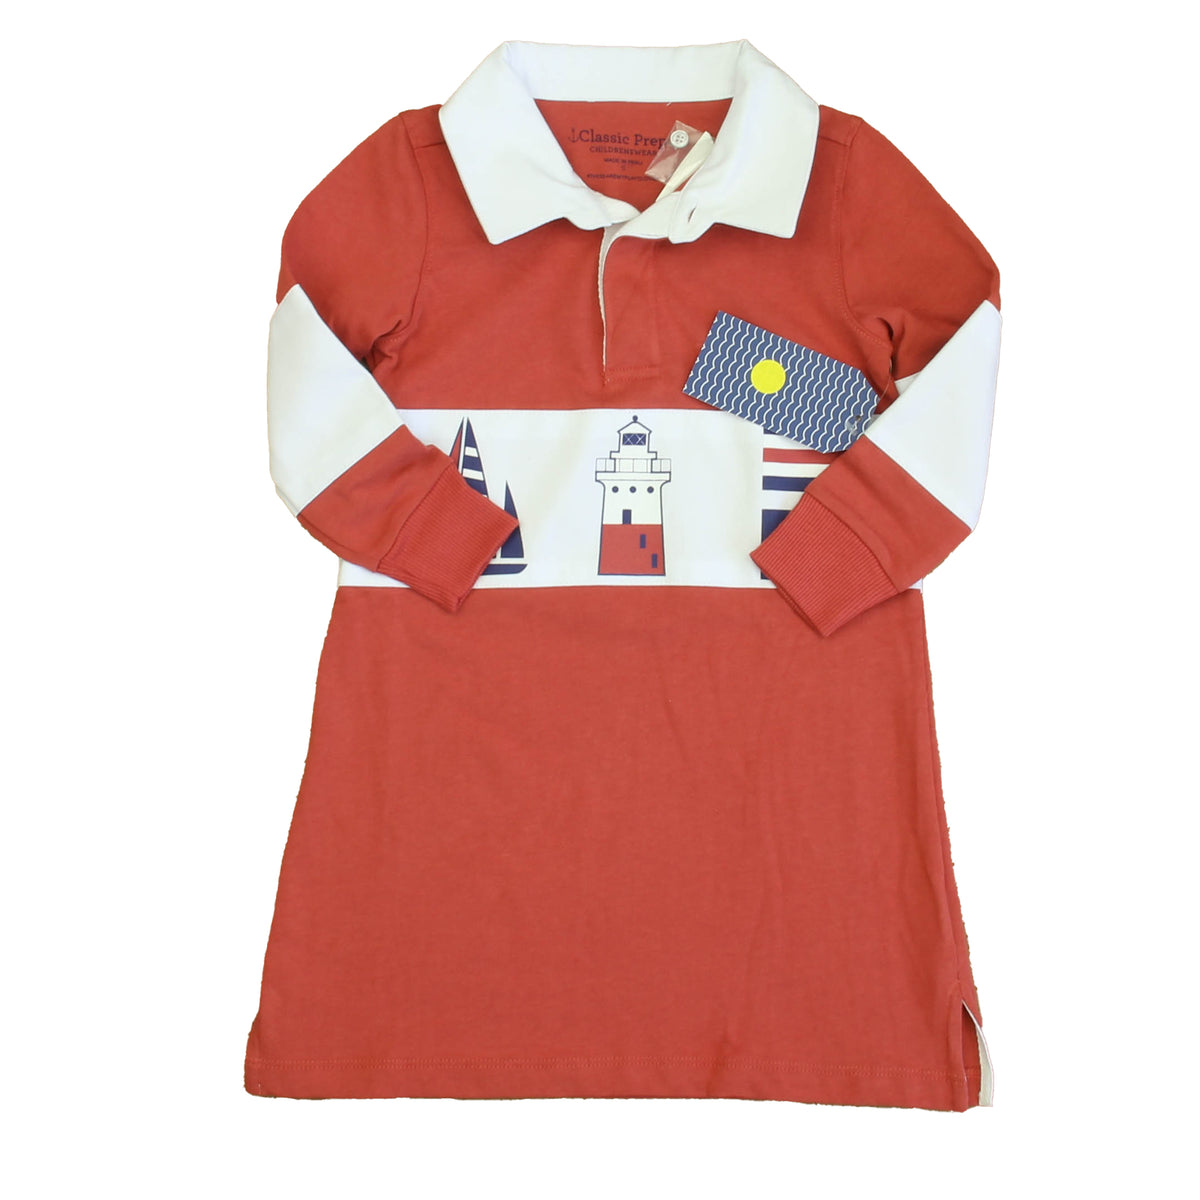 New with Tags: Red | White | Red Sailboats Dress size: 6-14 Years -- FINAL SALE